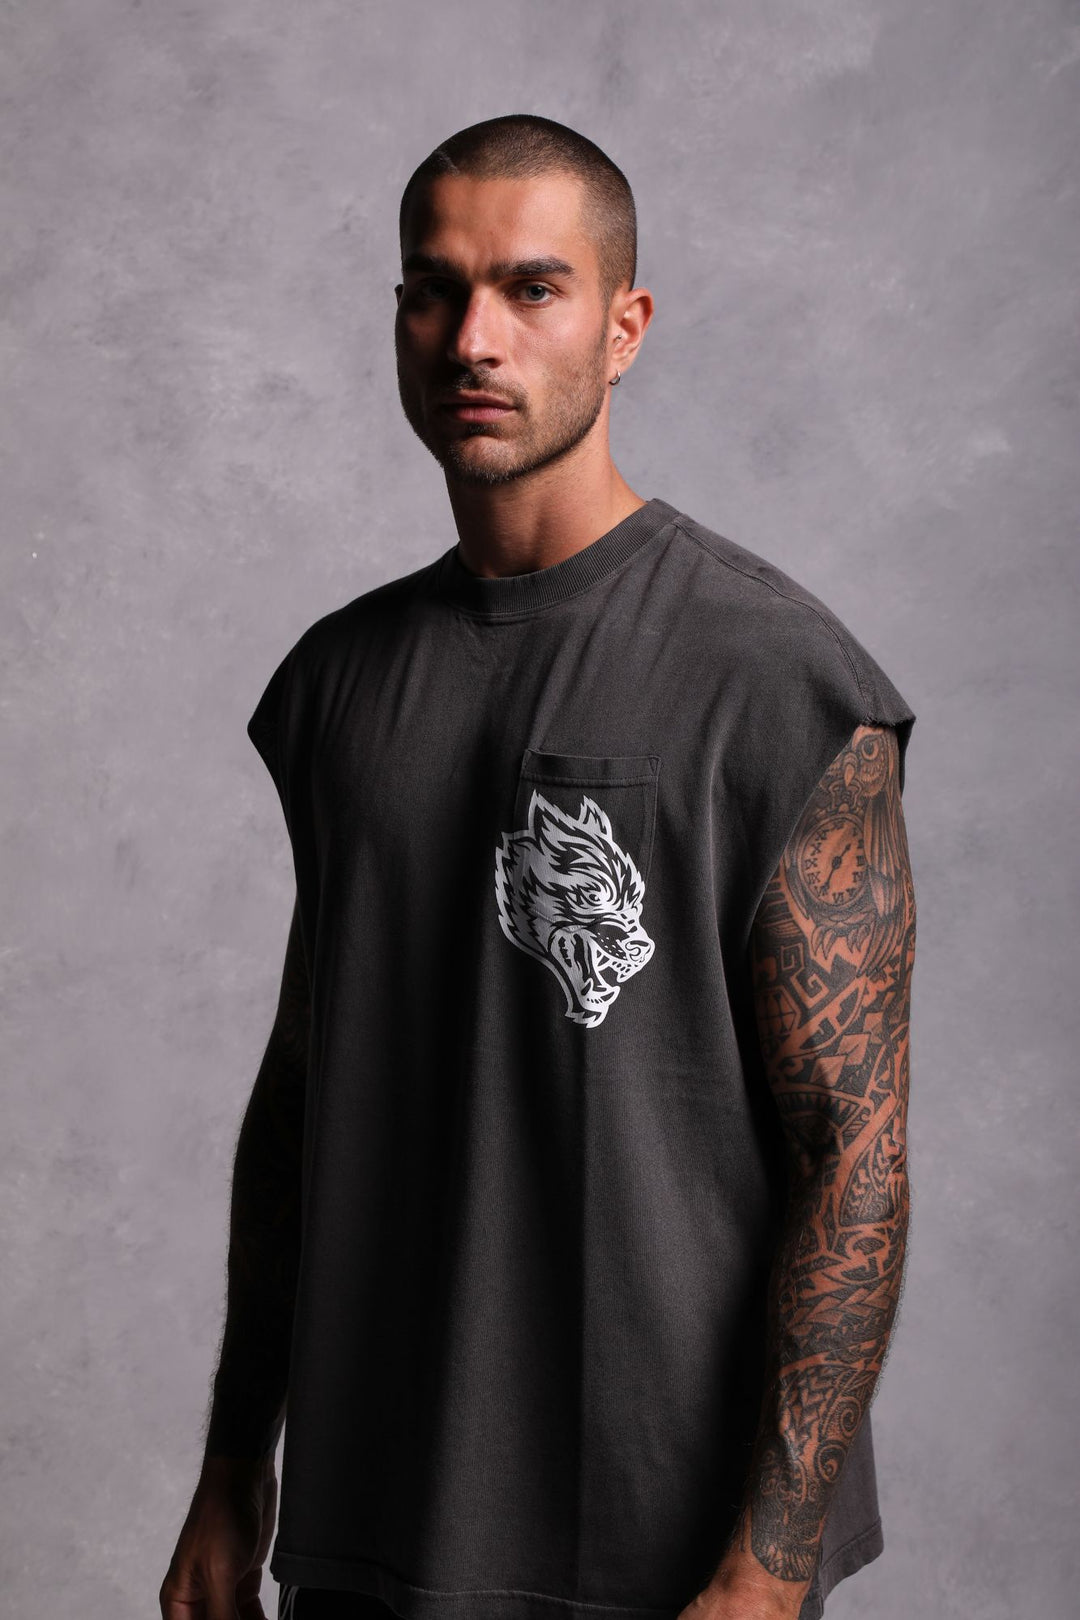 House Of Wolves "Premium Vintage" Pocket Muscle Tee in Wolf Gray